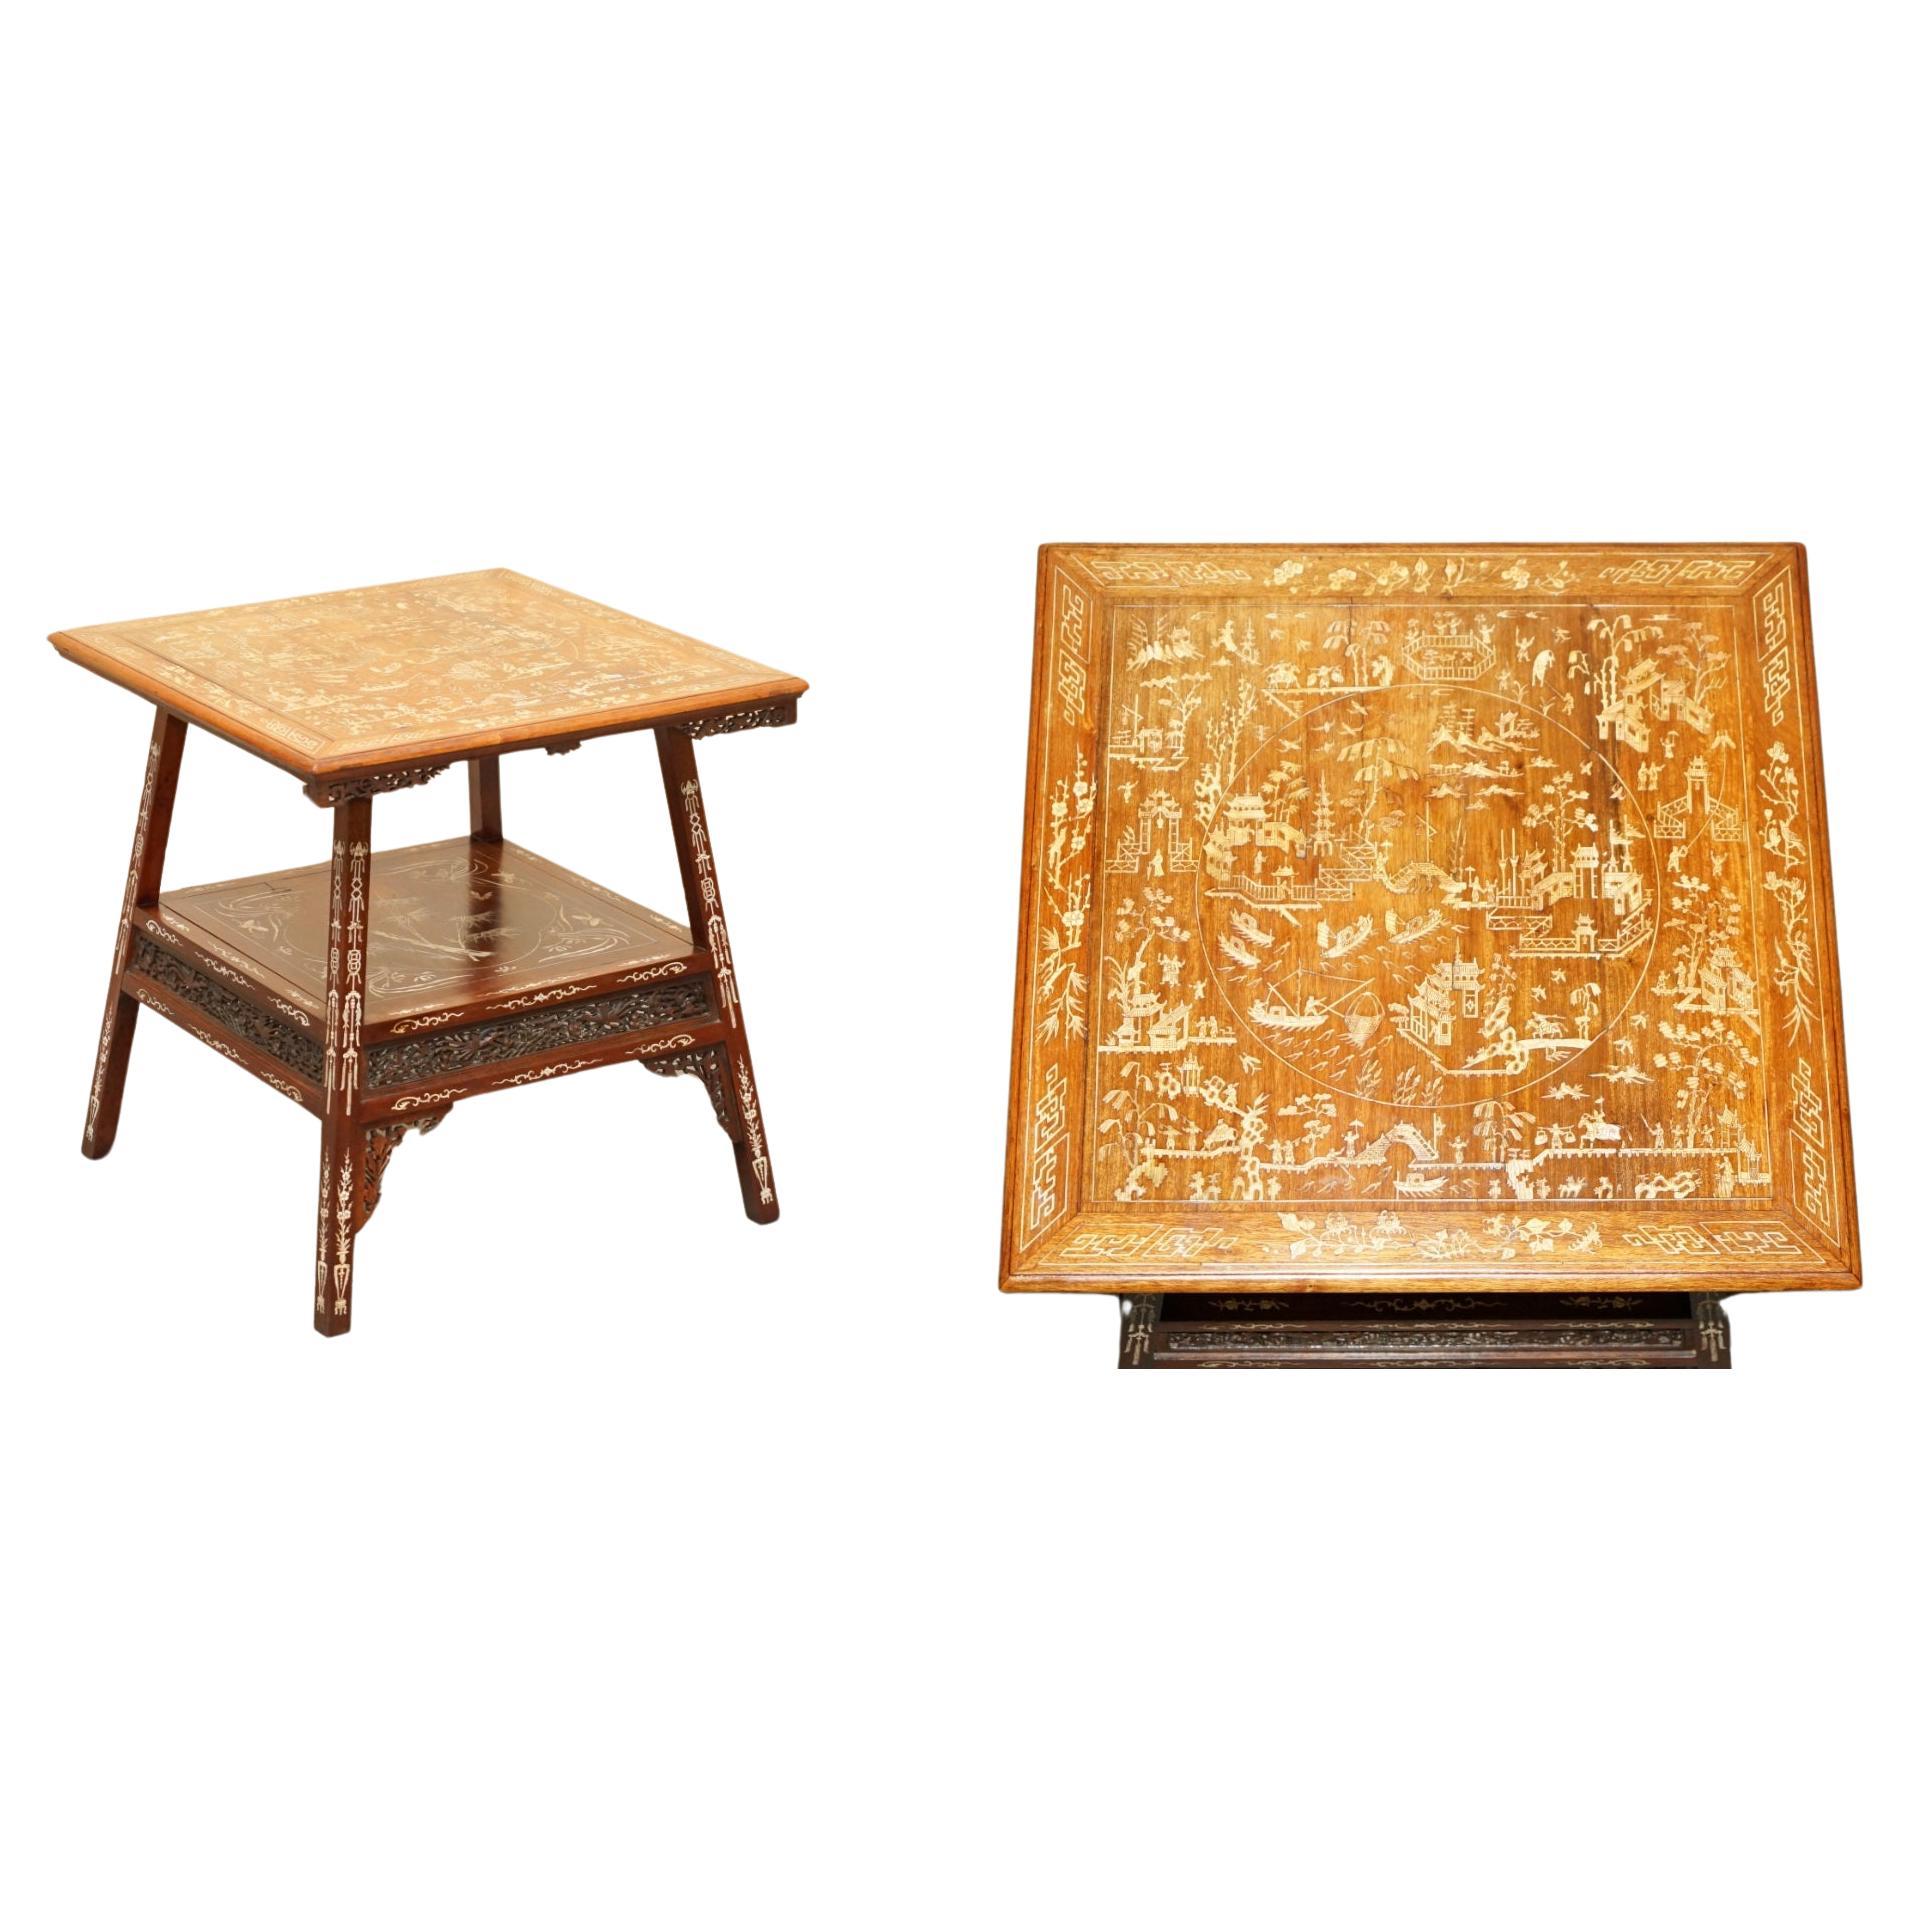 ANTIQUE CIRCA 1900ORNATELY CARVED AND HEAViLY INLAID CHINESE OCCASIONAL TABLE im Angebot